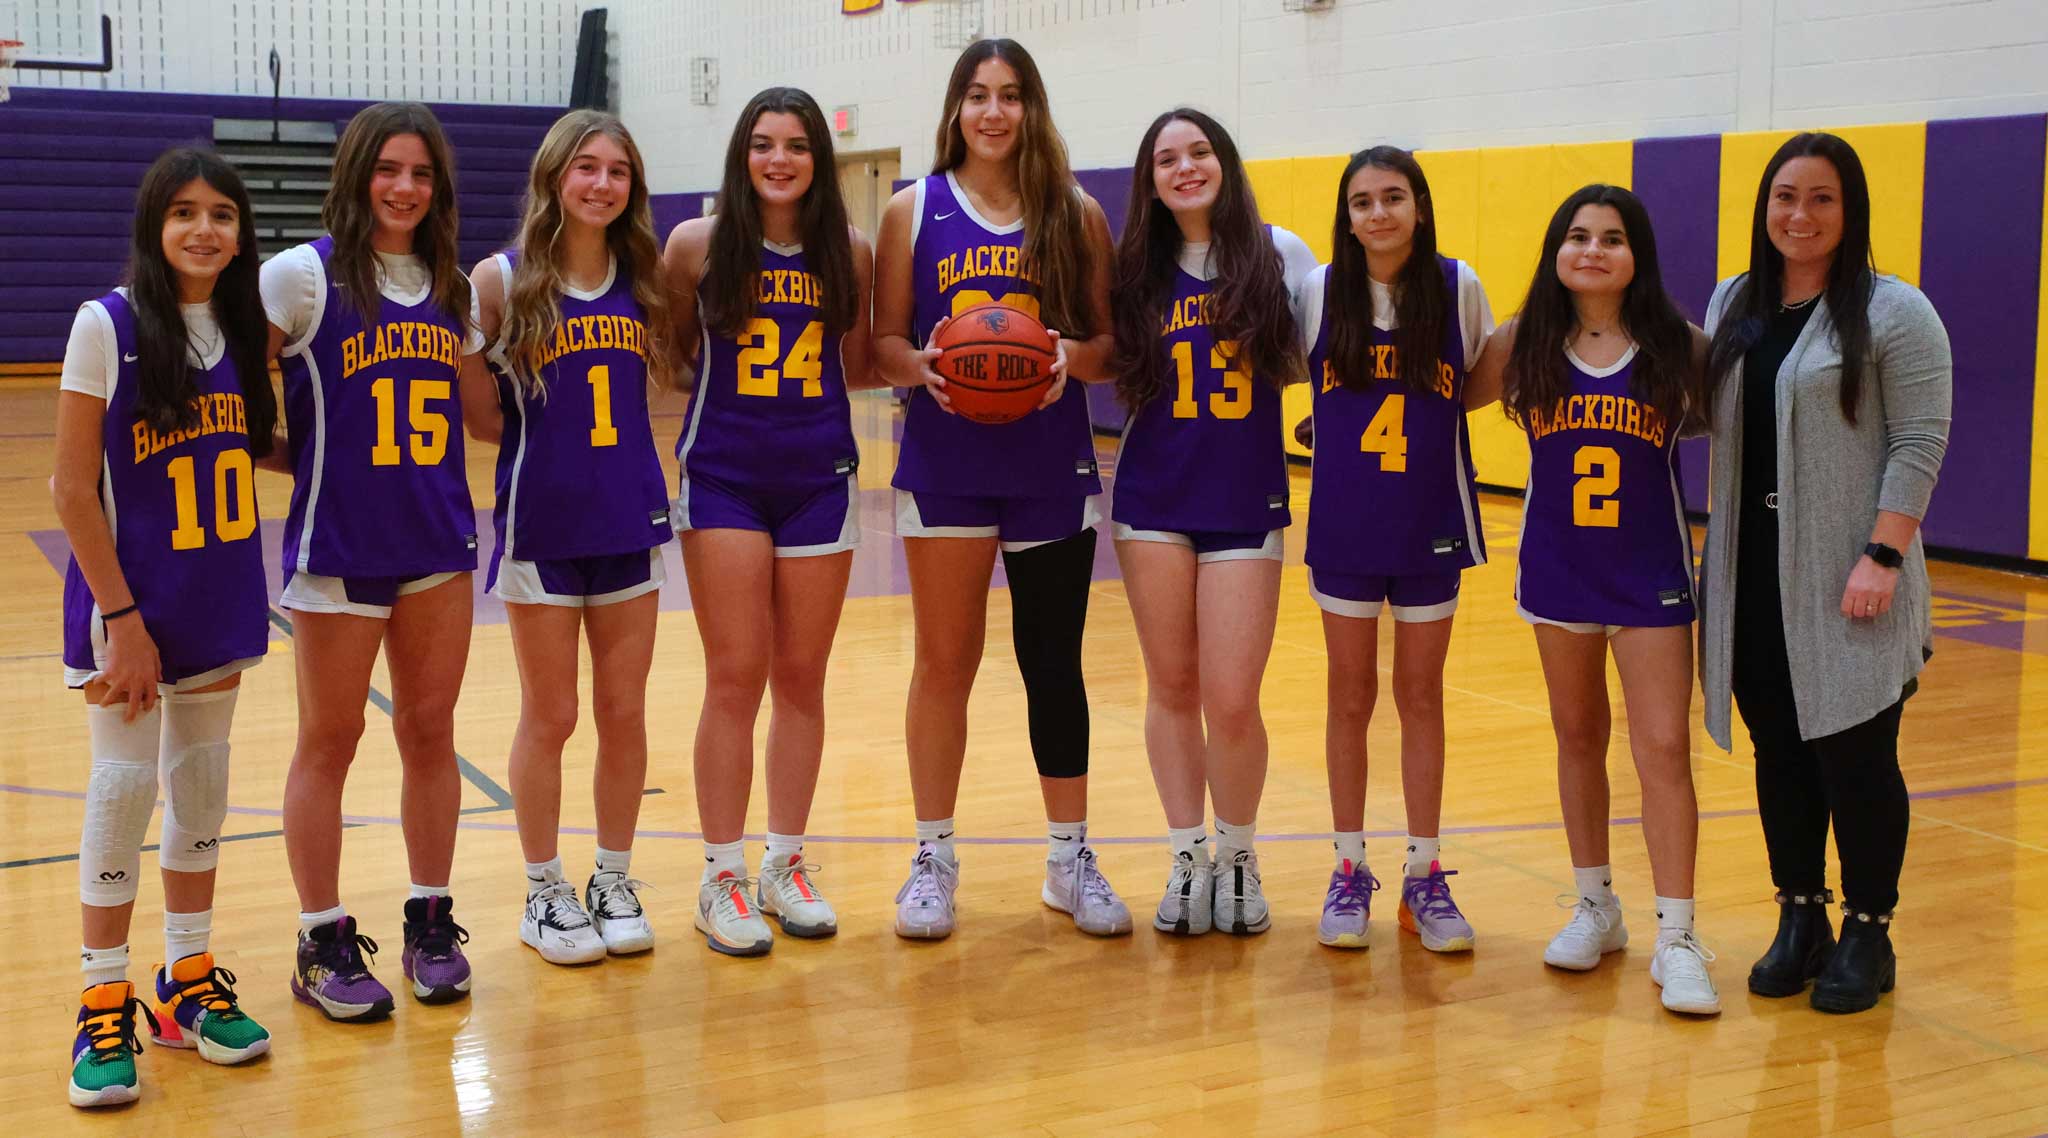 Voorheesville basketball team with blackbirds jerseys on. Coach is in group photo. Center player holds basketball.